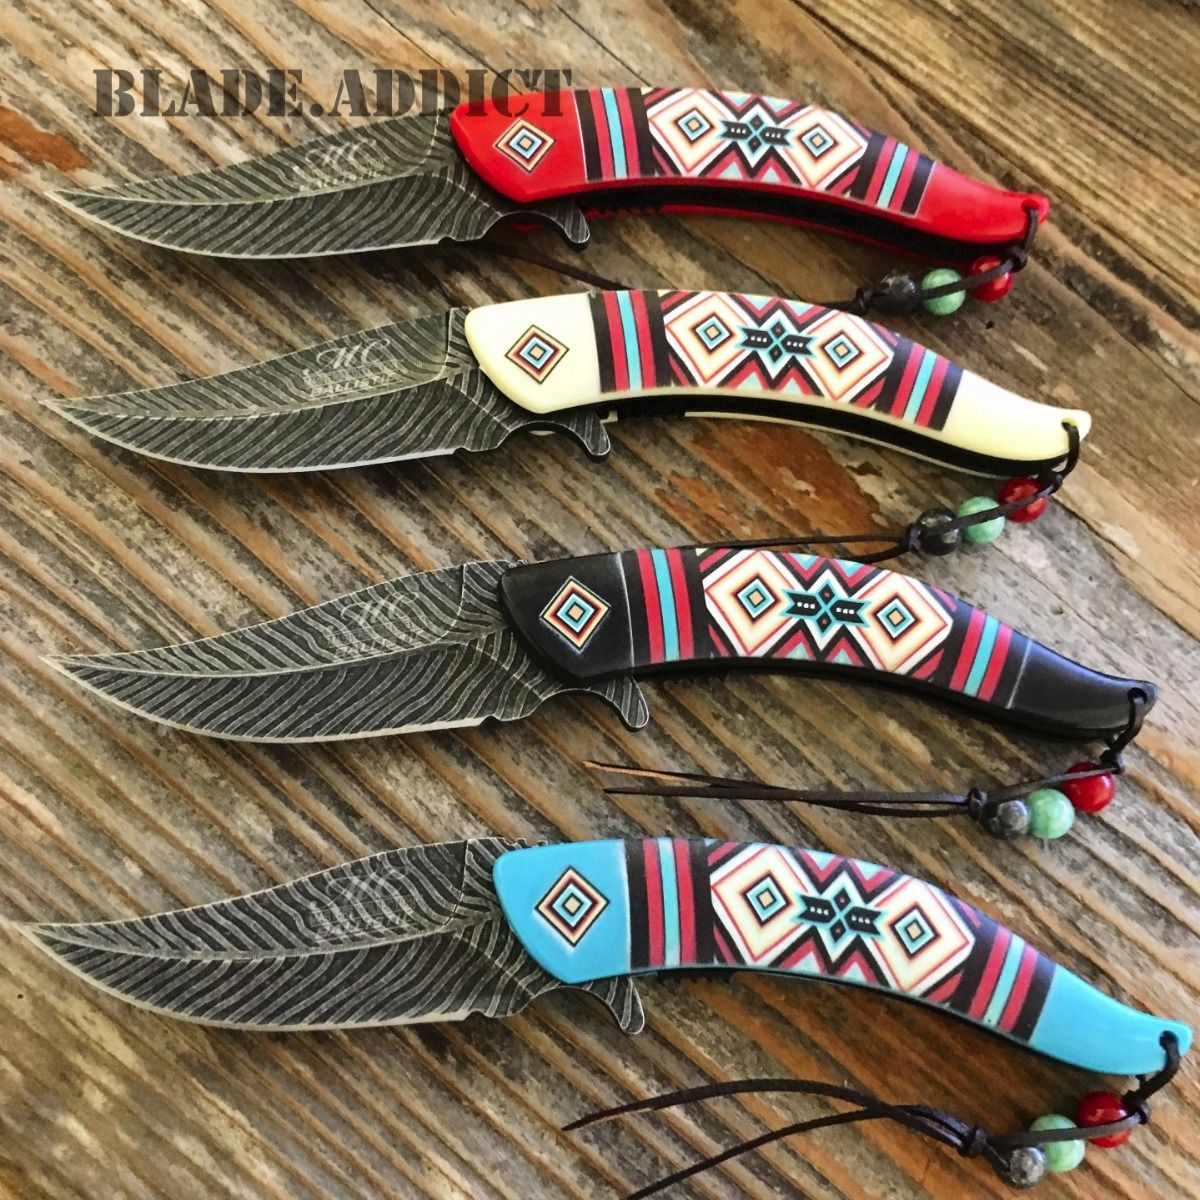 4PC NATIVE AMERICAN FEATHER DAMASCUS SPRING ASSISTED POCKET KNIFE